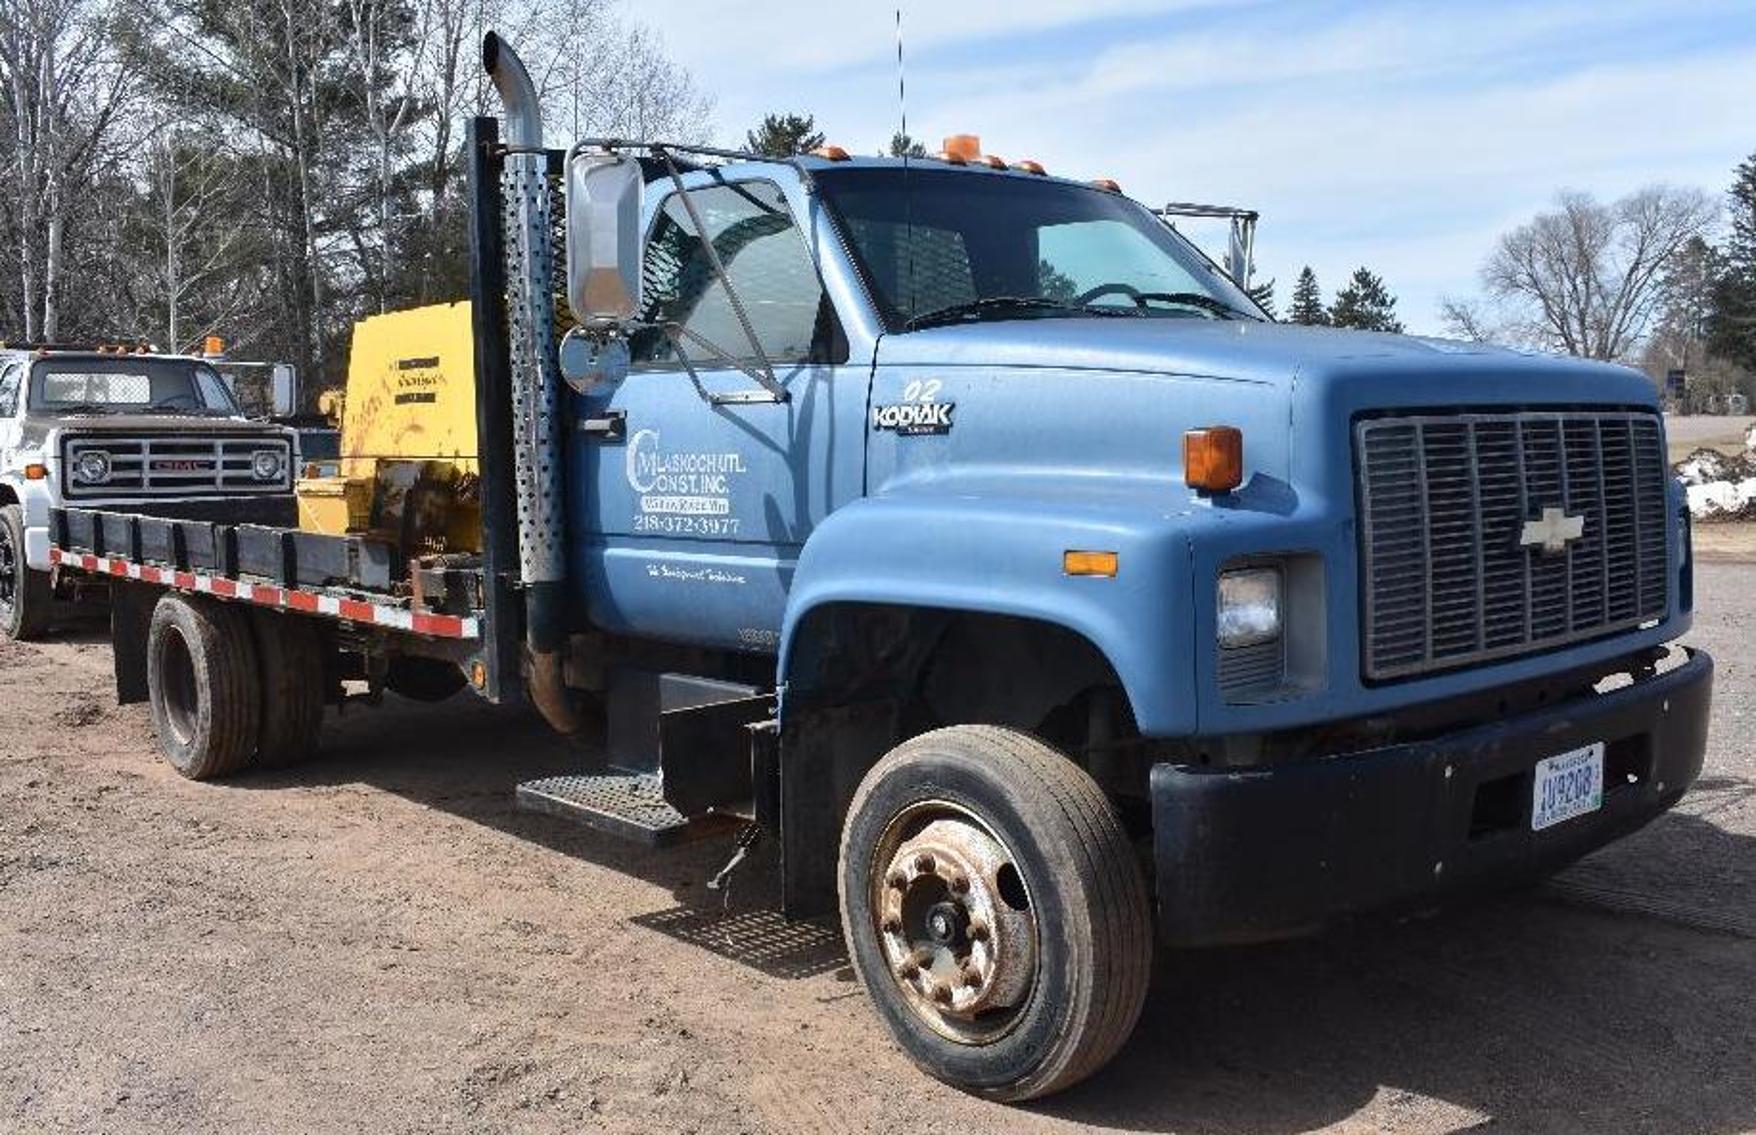 Utility Contractor Equipment: Trucks, Trenchers and Pole Trailer